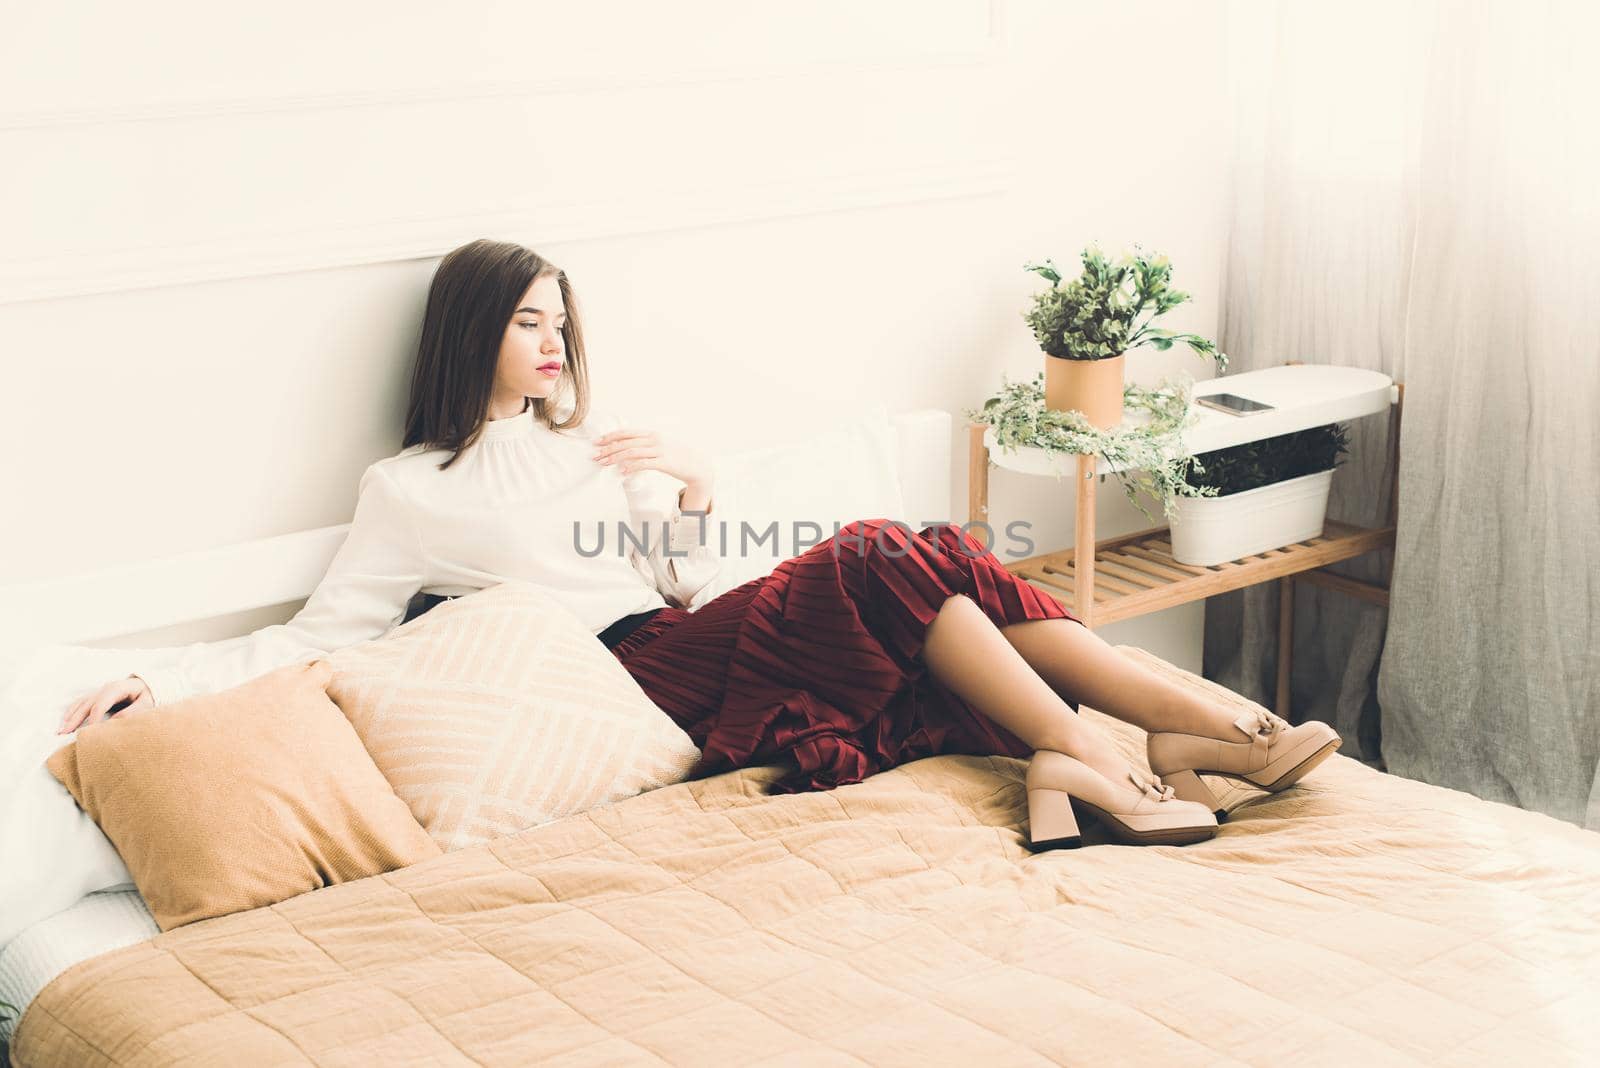 Portrait of fashionable women in red skirt, white blouse and stylish beige high-heeled shoes with a chain buckle posing in a bed. Girl with a big red lips